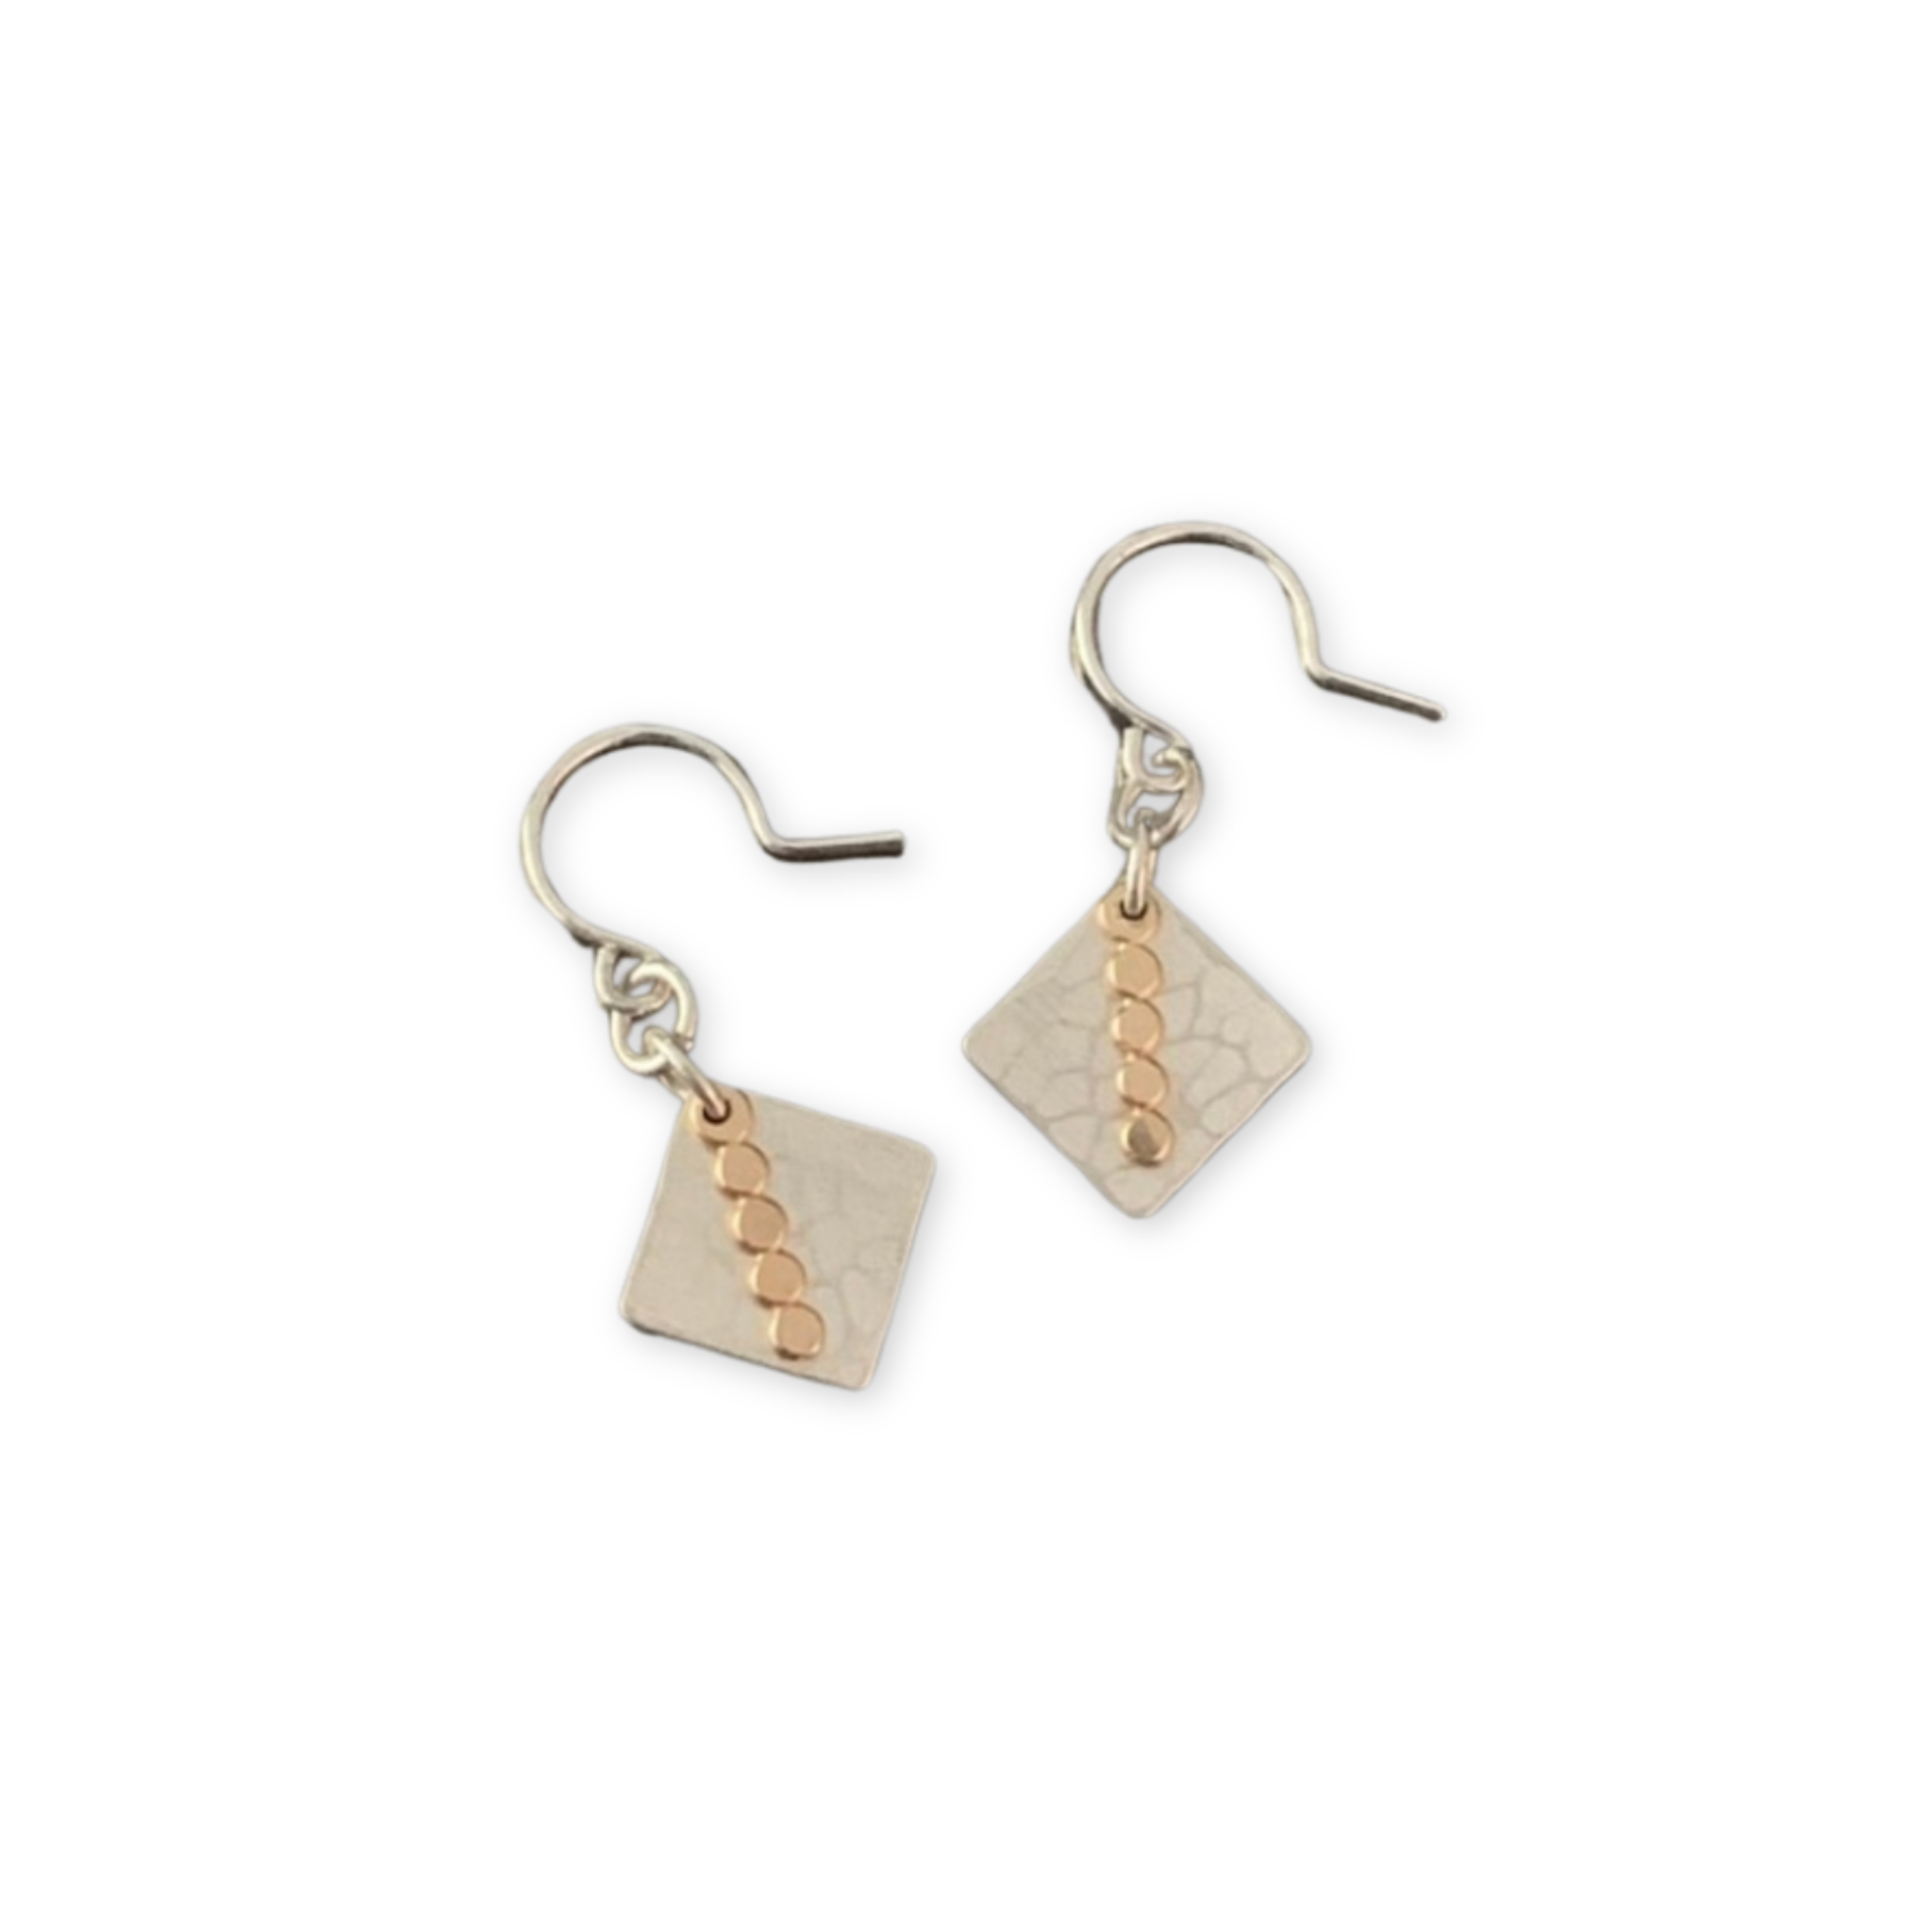 earrings featuring hand cut and hammered diamond shaped pendants topped with a row of dots